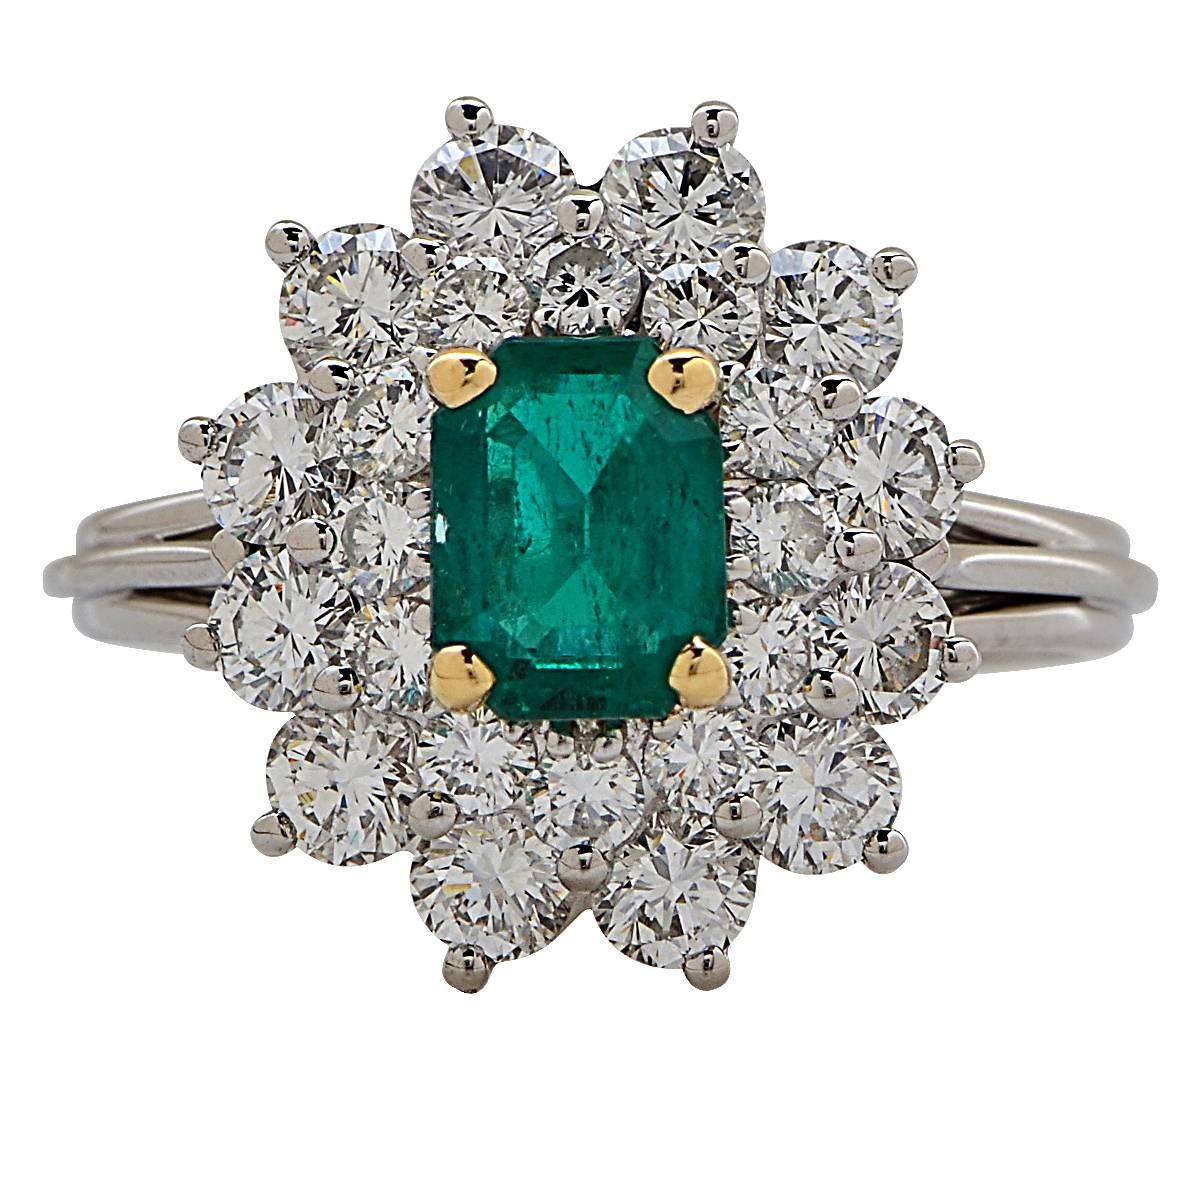 Platinum Ring Featuring a Colombian Emerald Weighing Approximately 1.10 Carats Accented by 24 Round Brilliant Cut Diamonds Weighing Approximately 2 Carats Total, F Color, VS Clarity.

Ring Size: 6.5